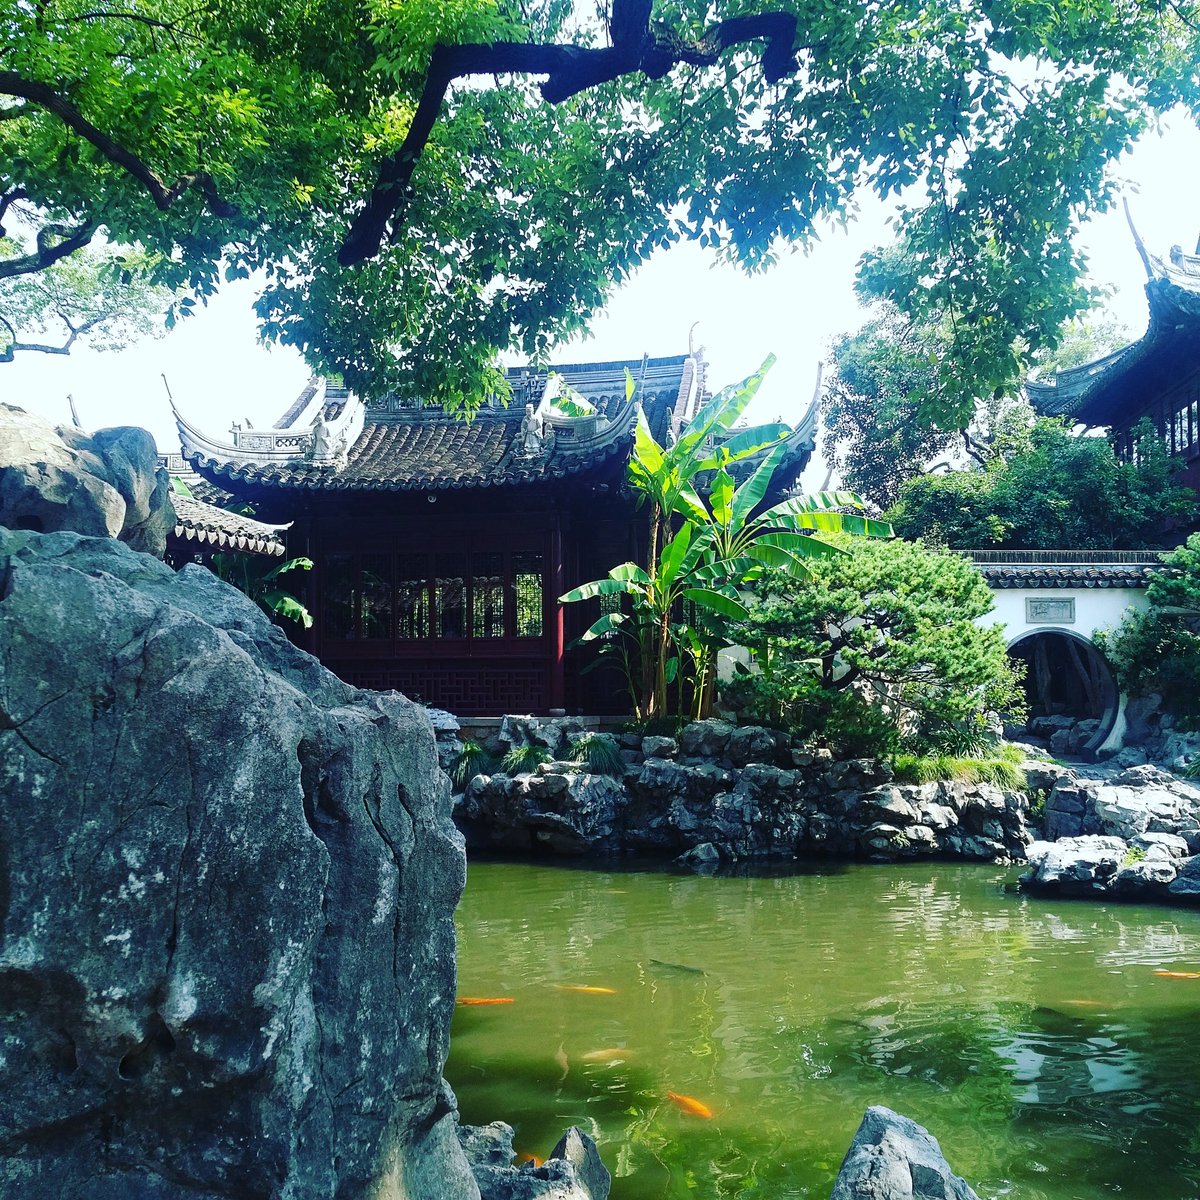 The magnificent #YuGarden in #Shanghai #China Photo with #BlackBerry